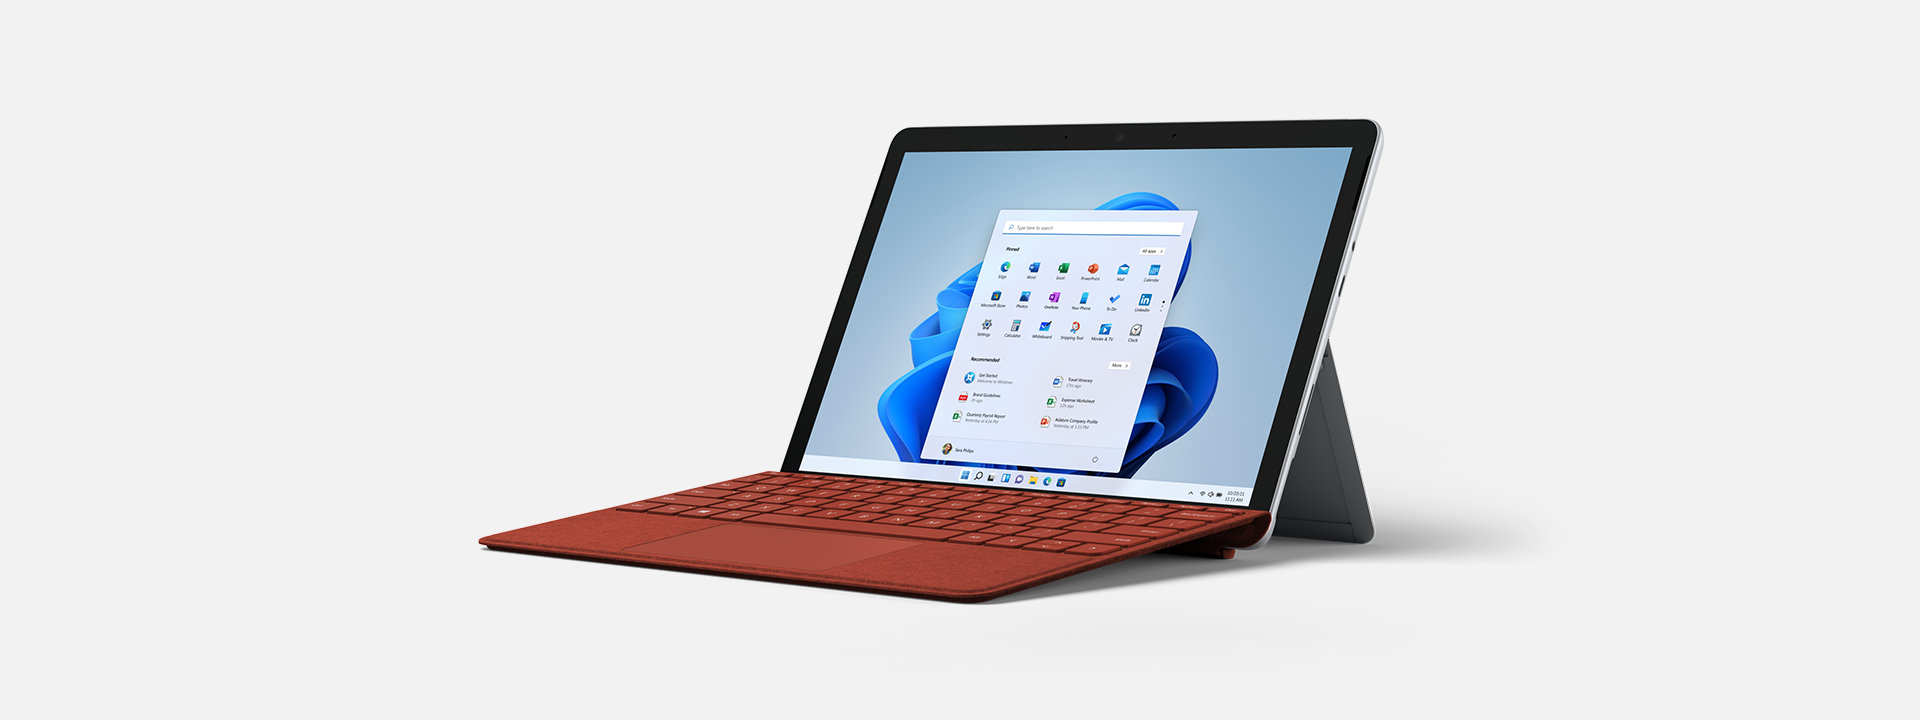 A Surface Go 3 for business in laptop position with keyboard.